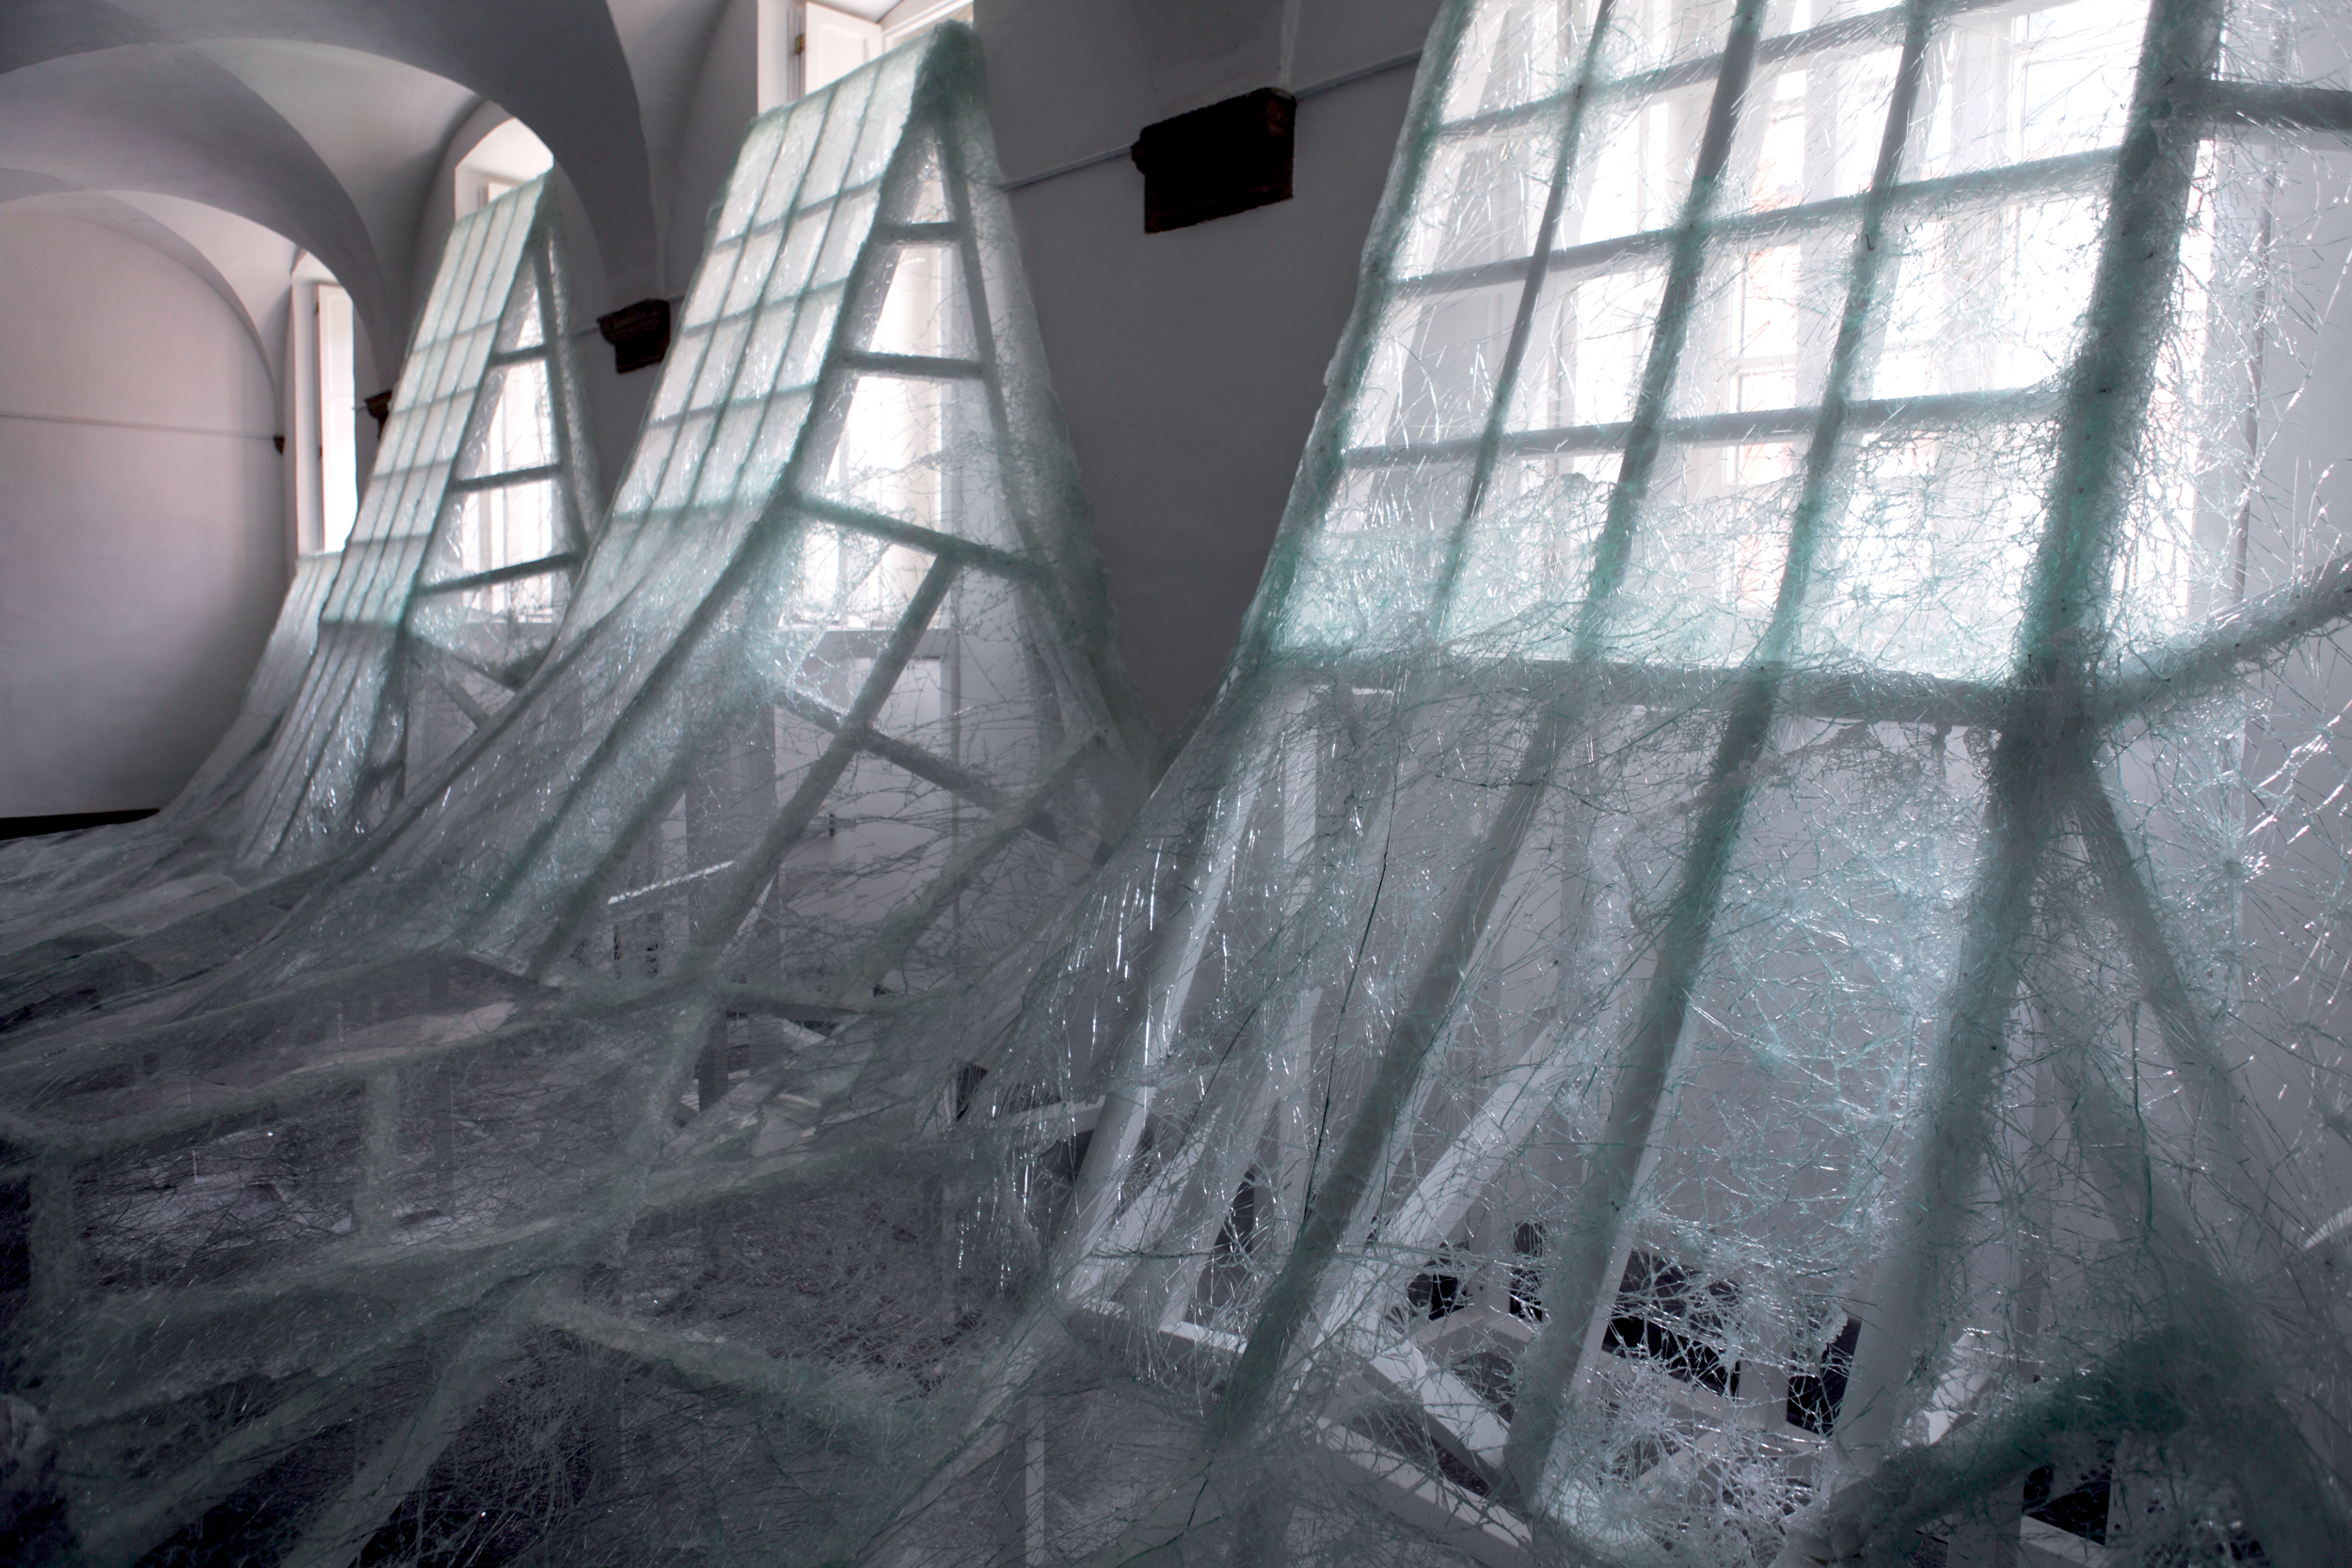 An art installation made of tons of glass that appear to melt off of windows in an old abbey.